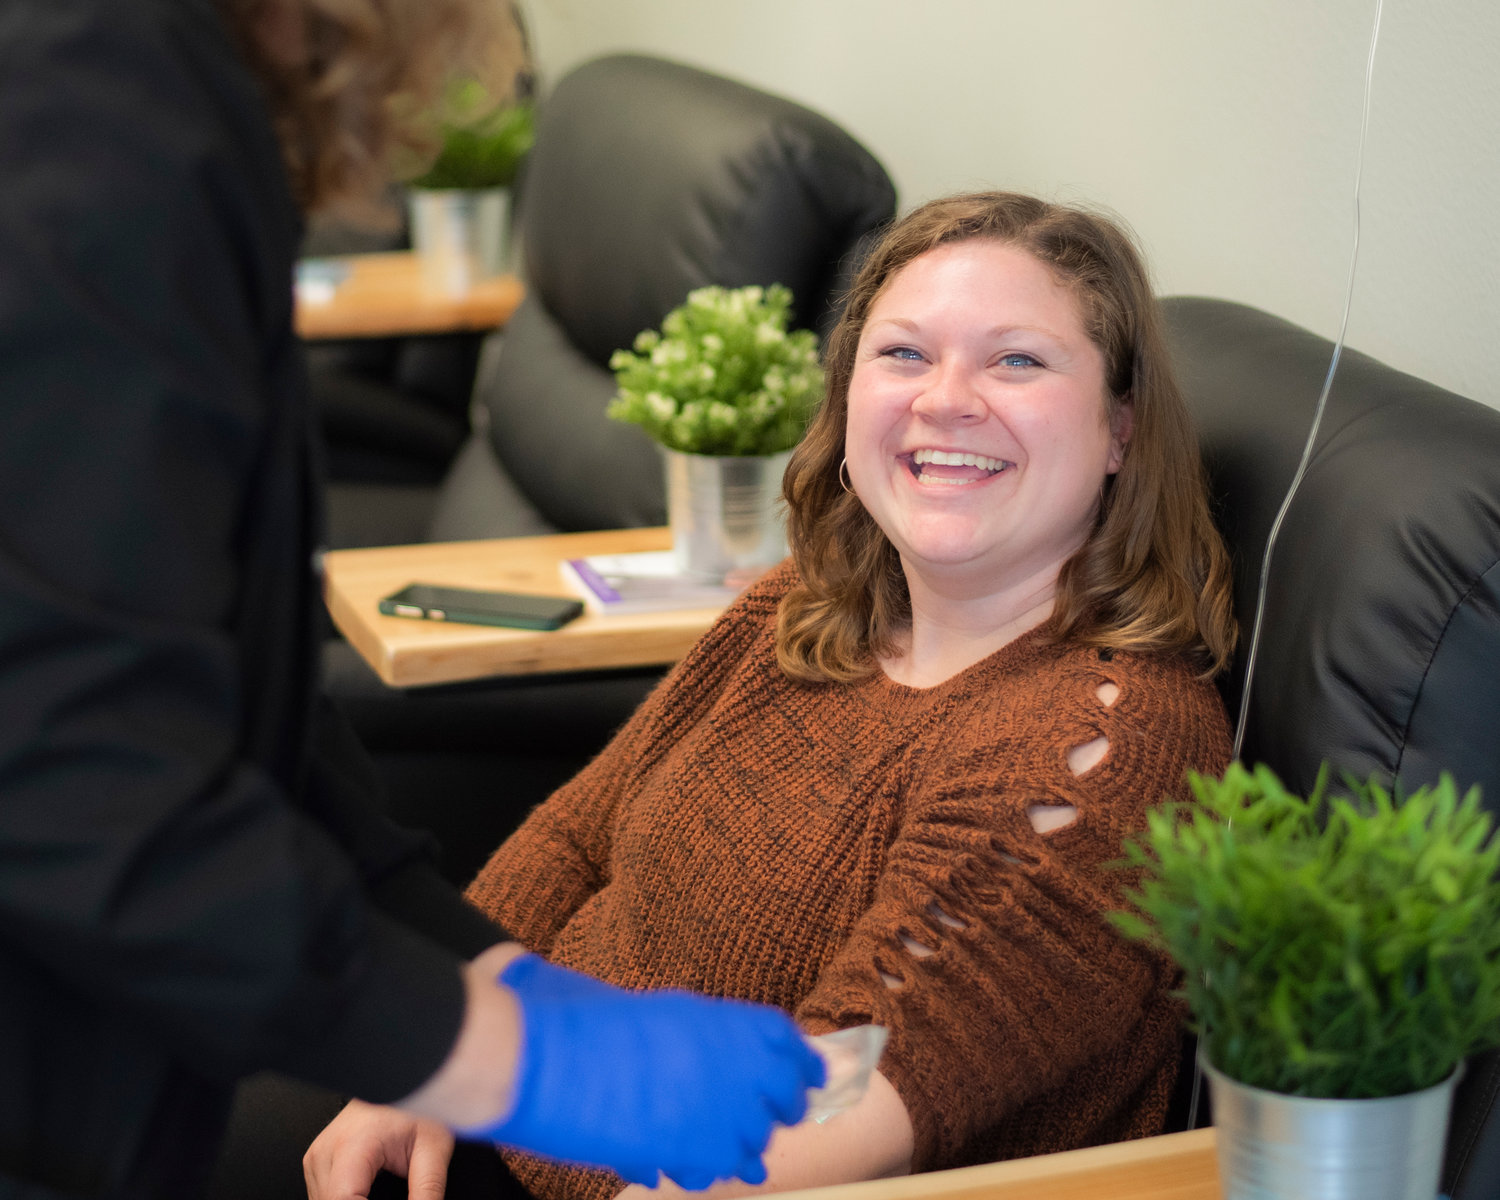 Office Manager Mikayla Rockey smiles while receiving an infusion Tuesday at Evexia Northwest in Centralia.